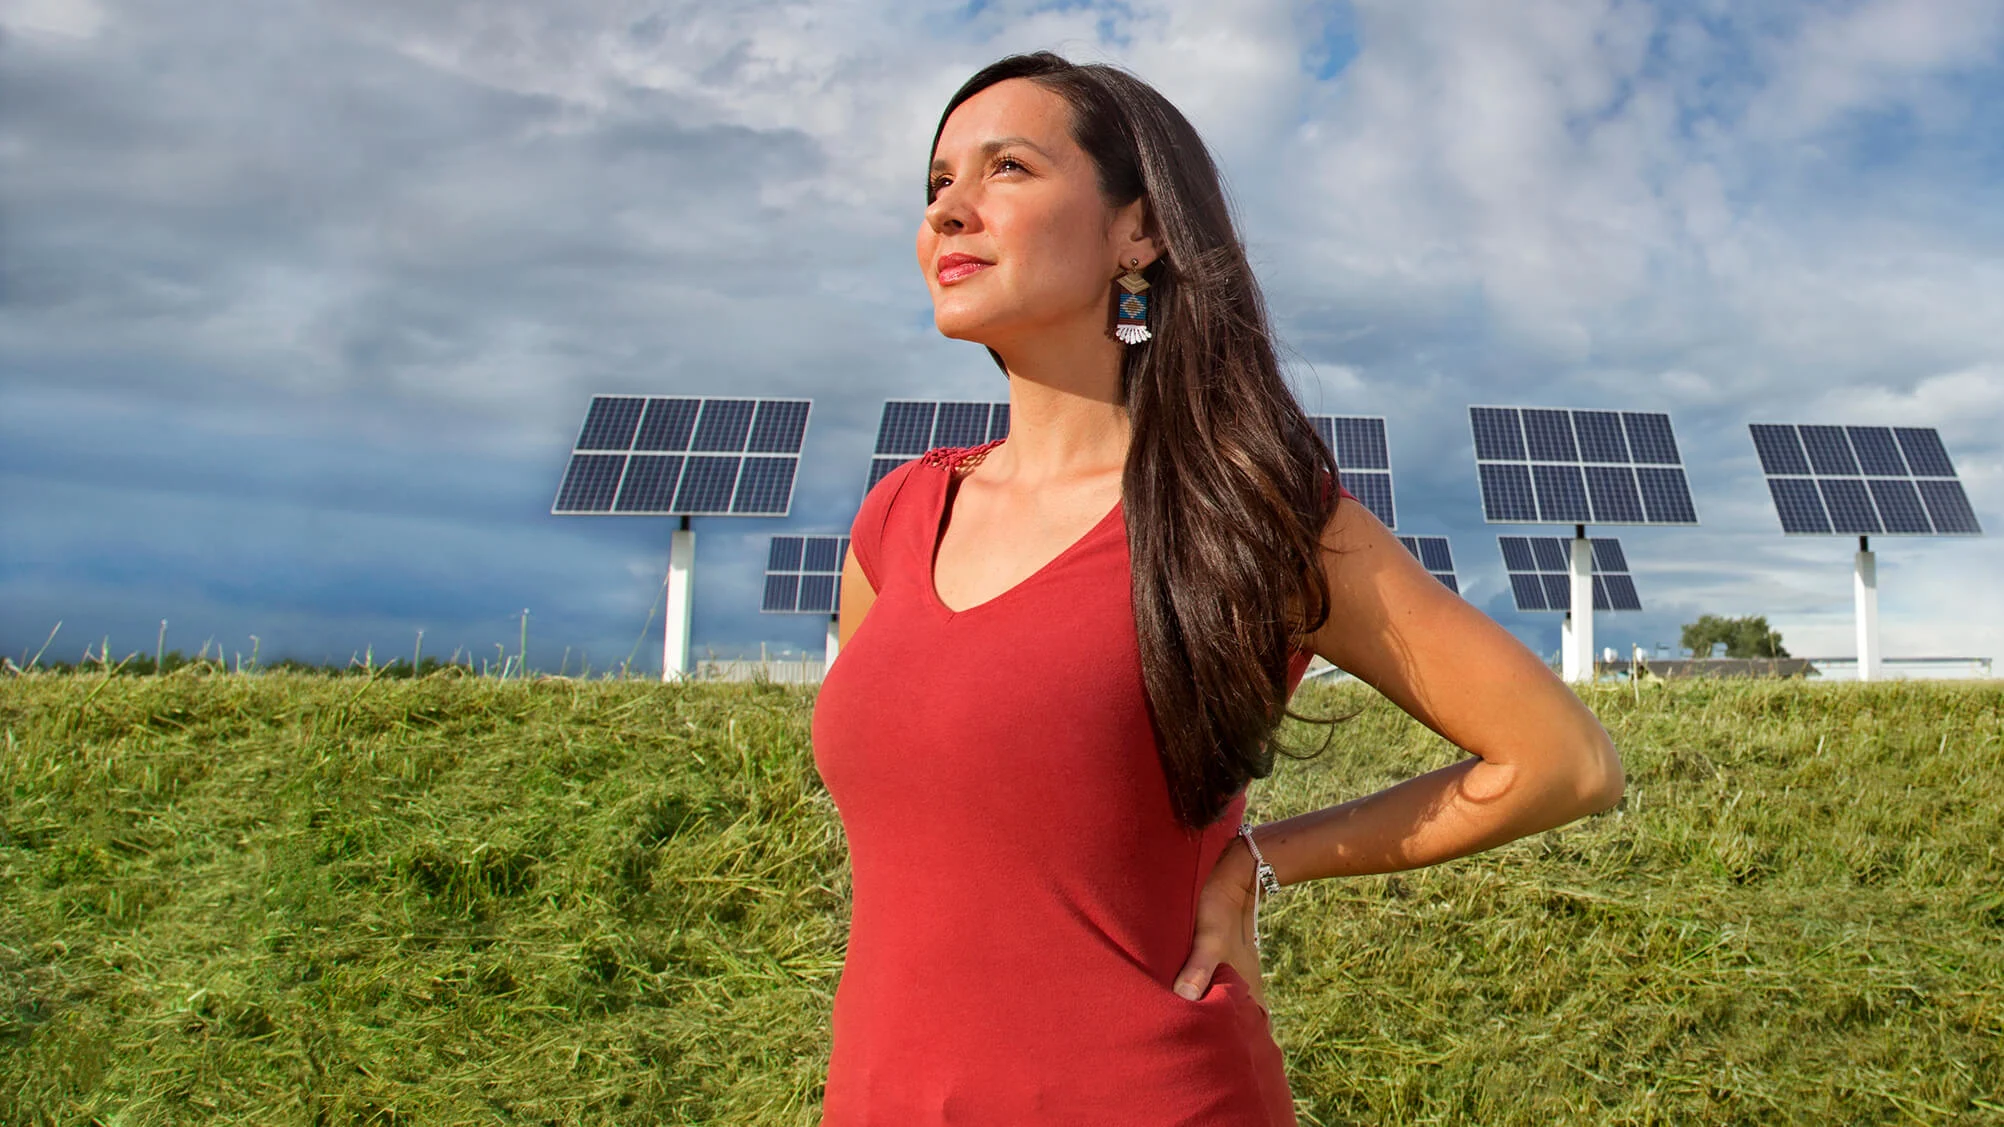 'We need to be the leaders in our own projects,' said Laboucan-Massimo, who launched a successful solar project on her traditional homelands. (Greg Miller/University of Victoria) 